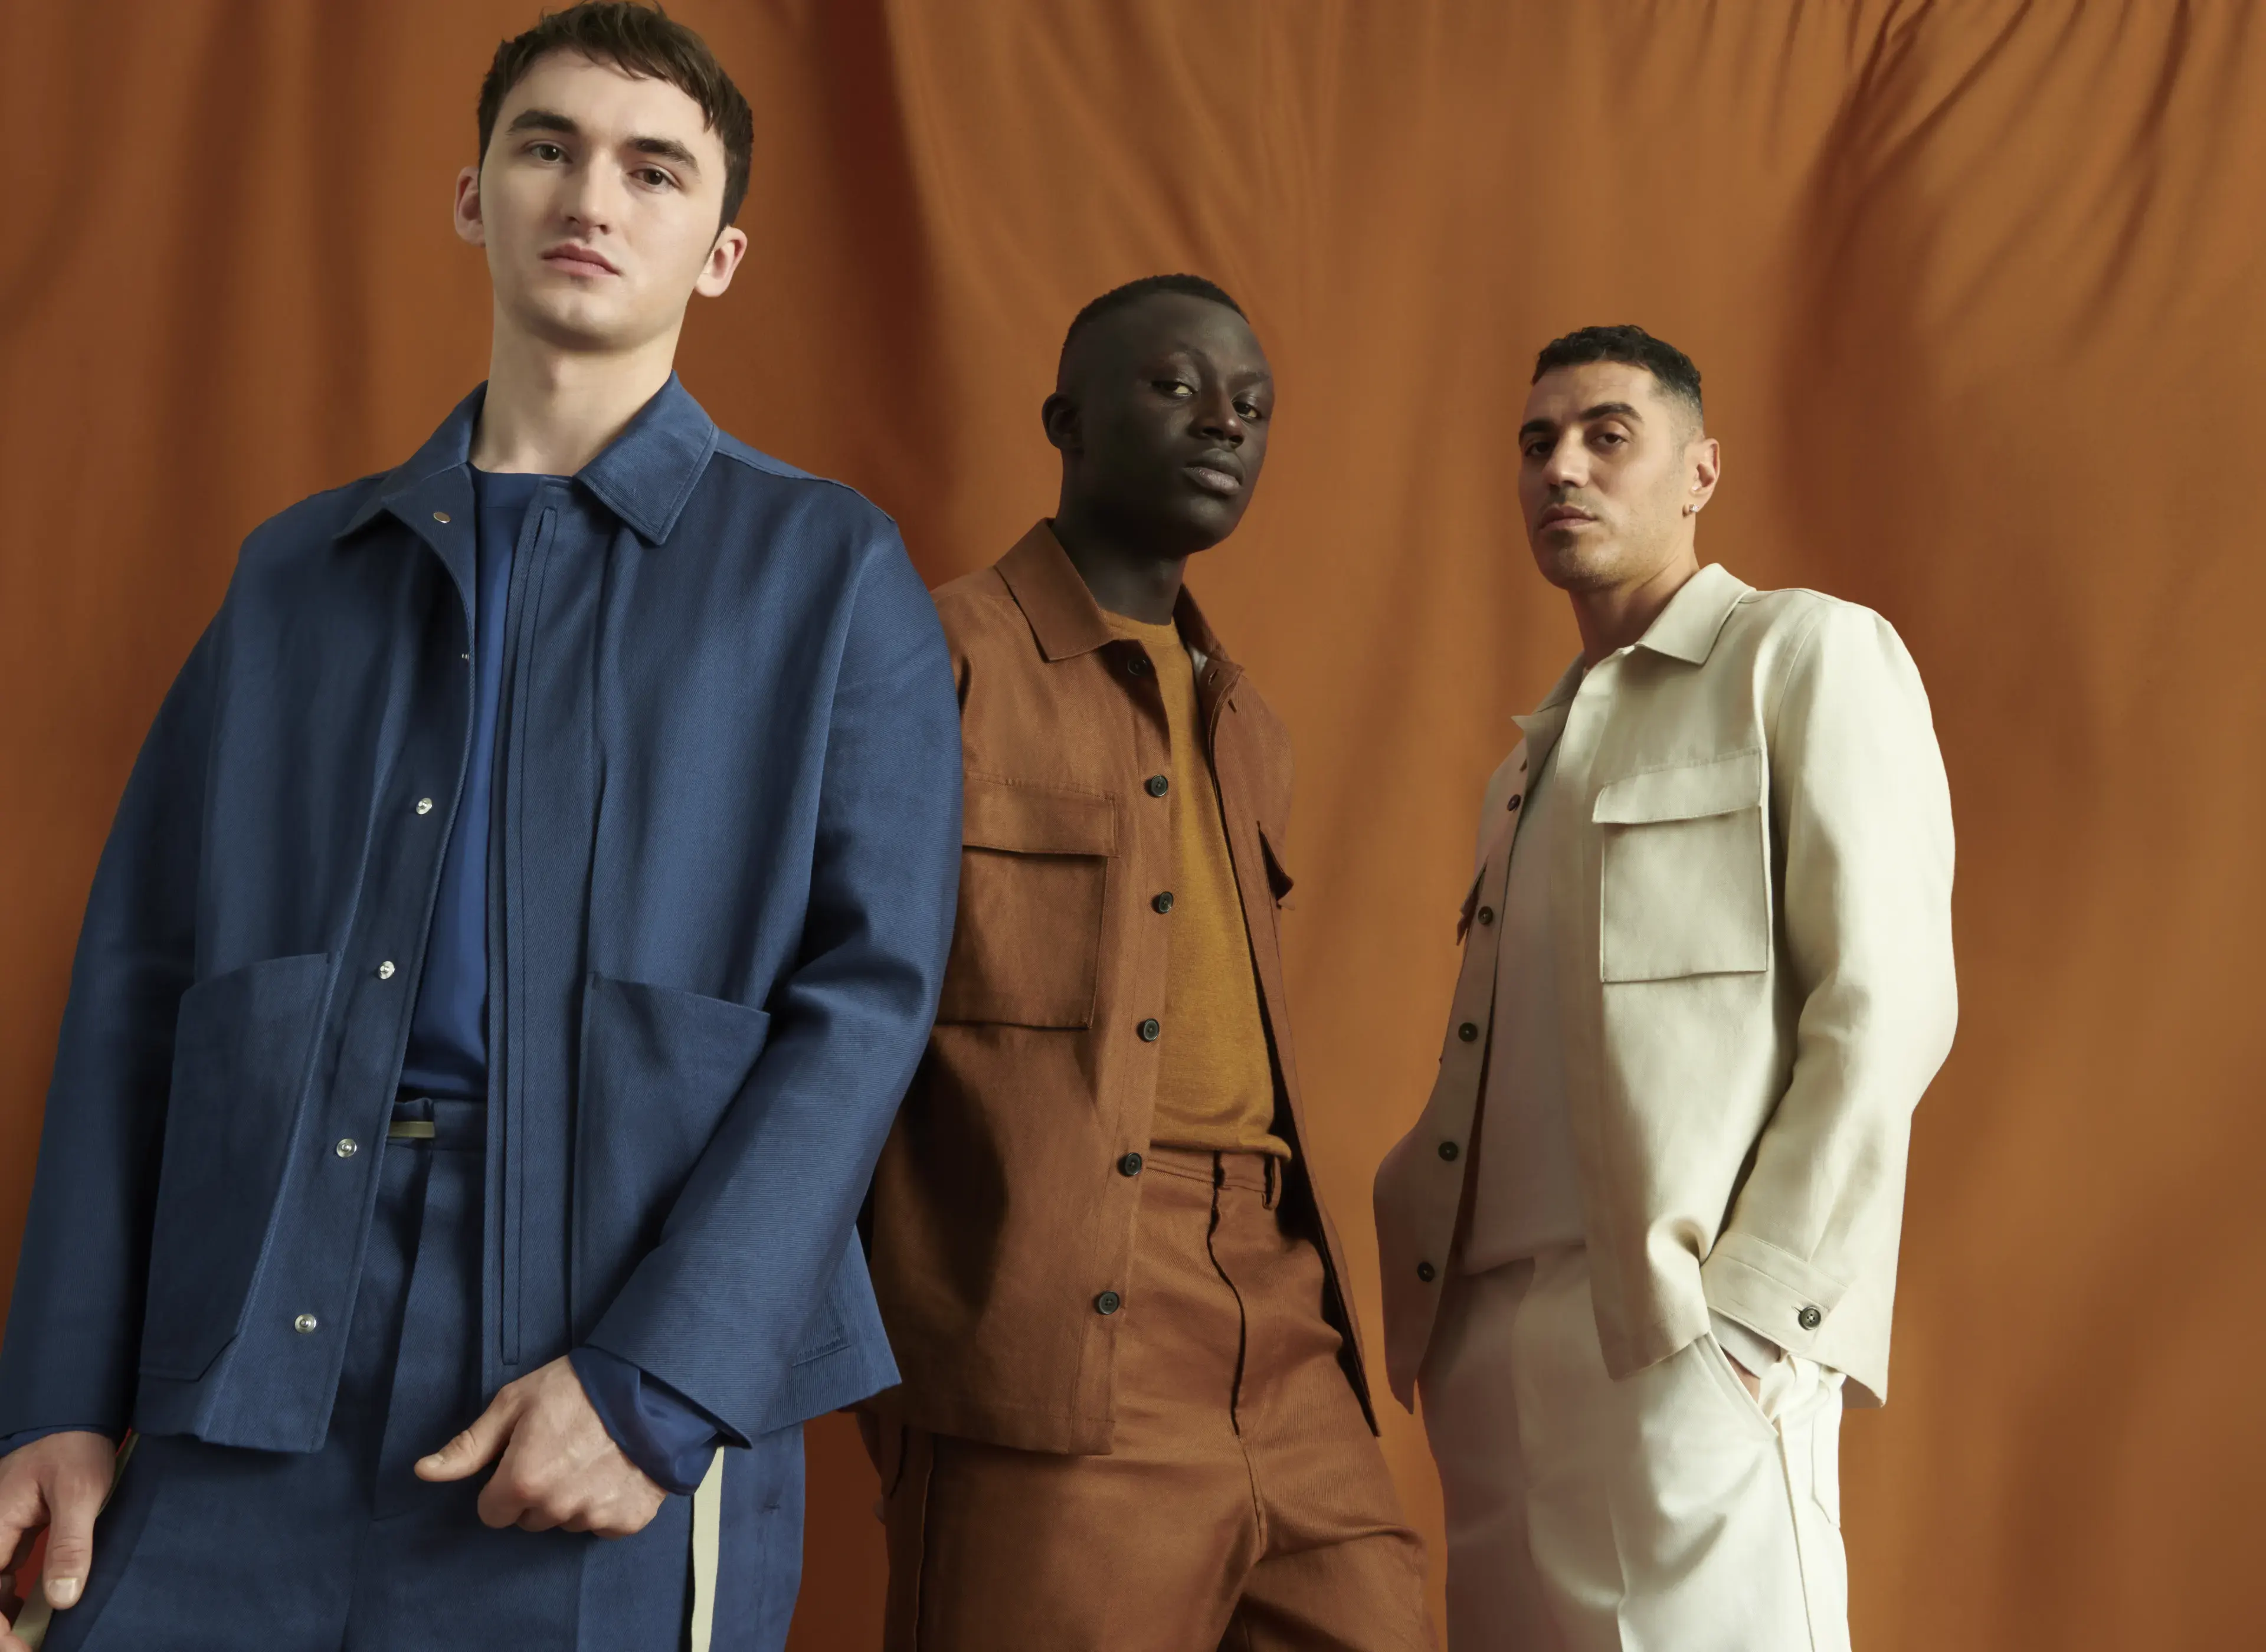 Zegna 232 campaign: our family of visionaries